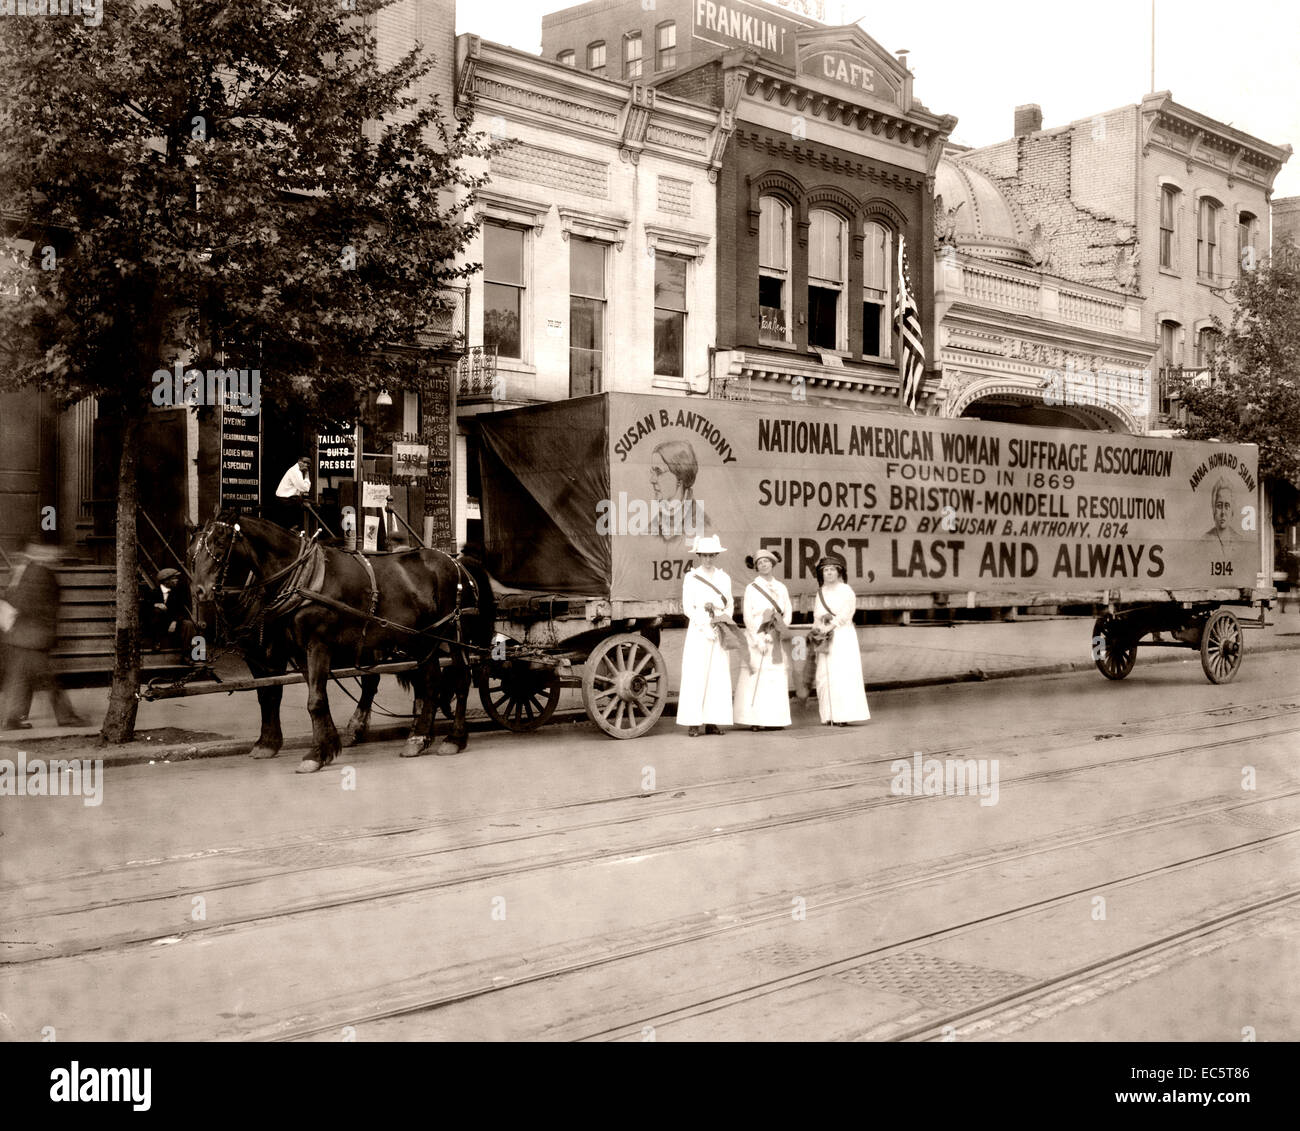 Three women standing in the street in front of horse-drawn wagon with sign, National American Woman Suffrage Association founded in 1869 supports Bristow-Mondell Resolution drafted by Susan B. Anthony, 1874, 'First, Last and Always.' Circa 1917. Stock Photo